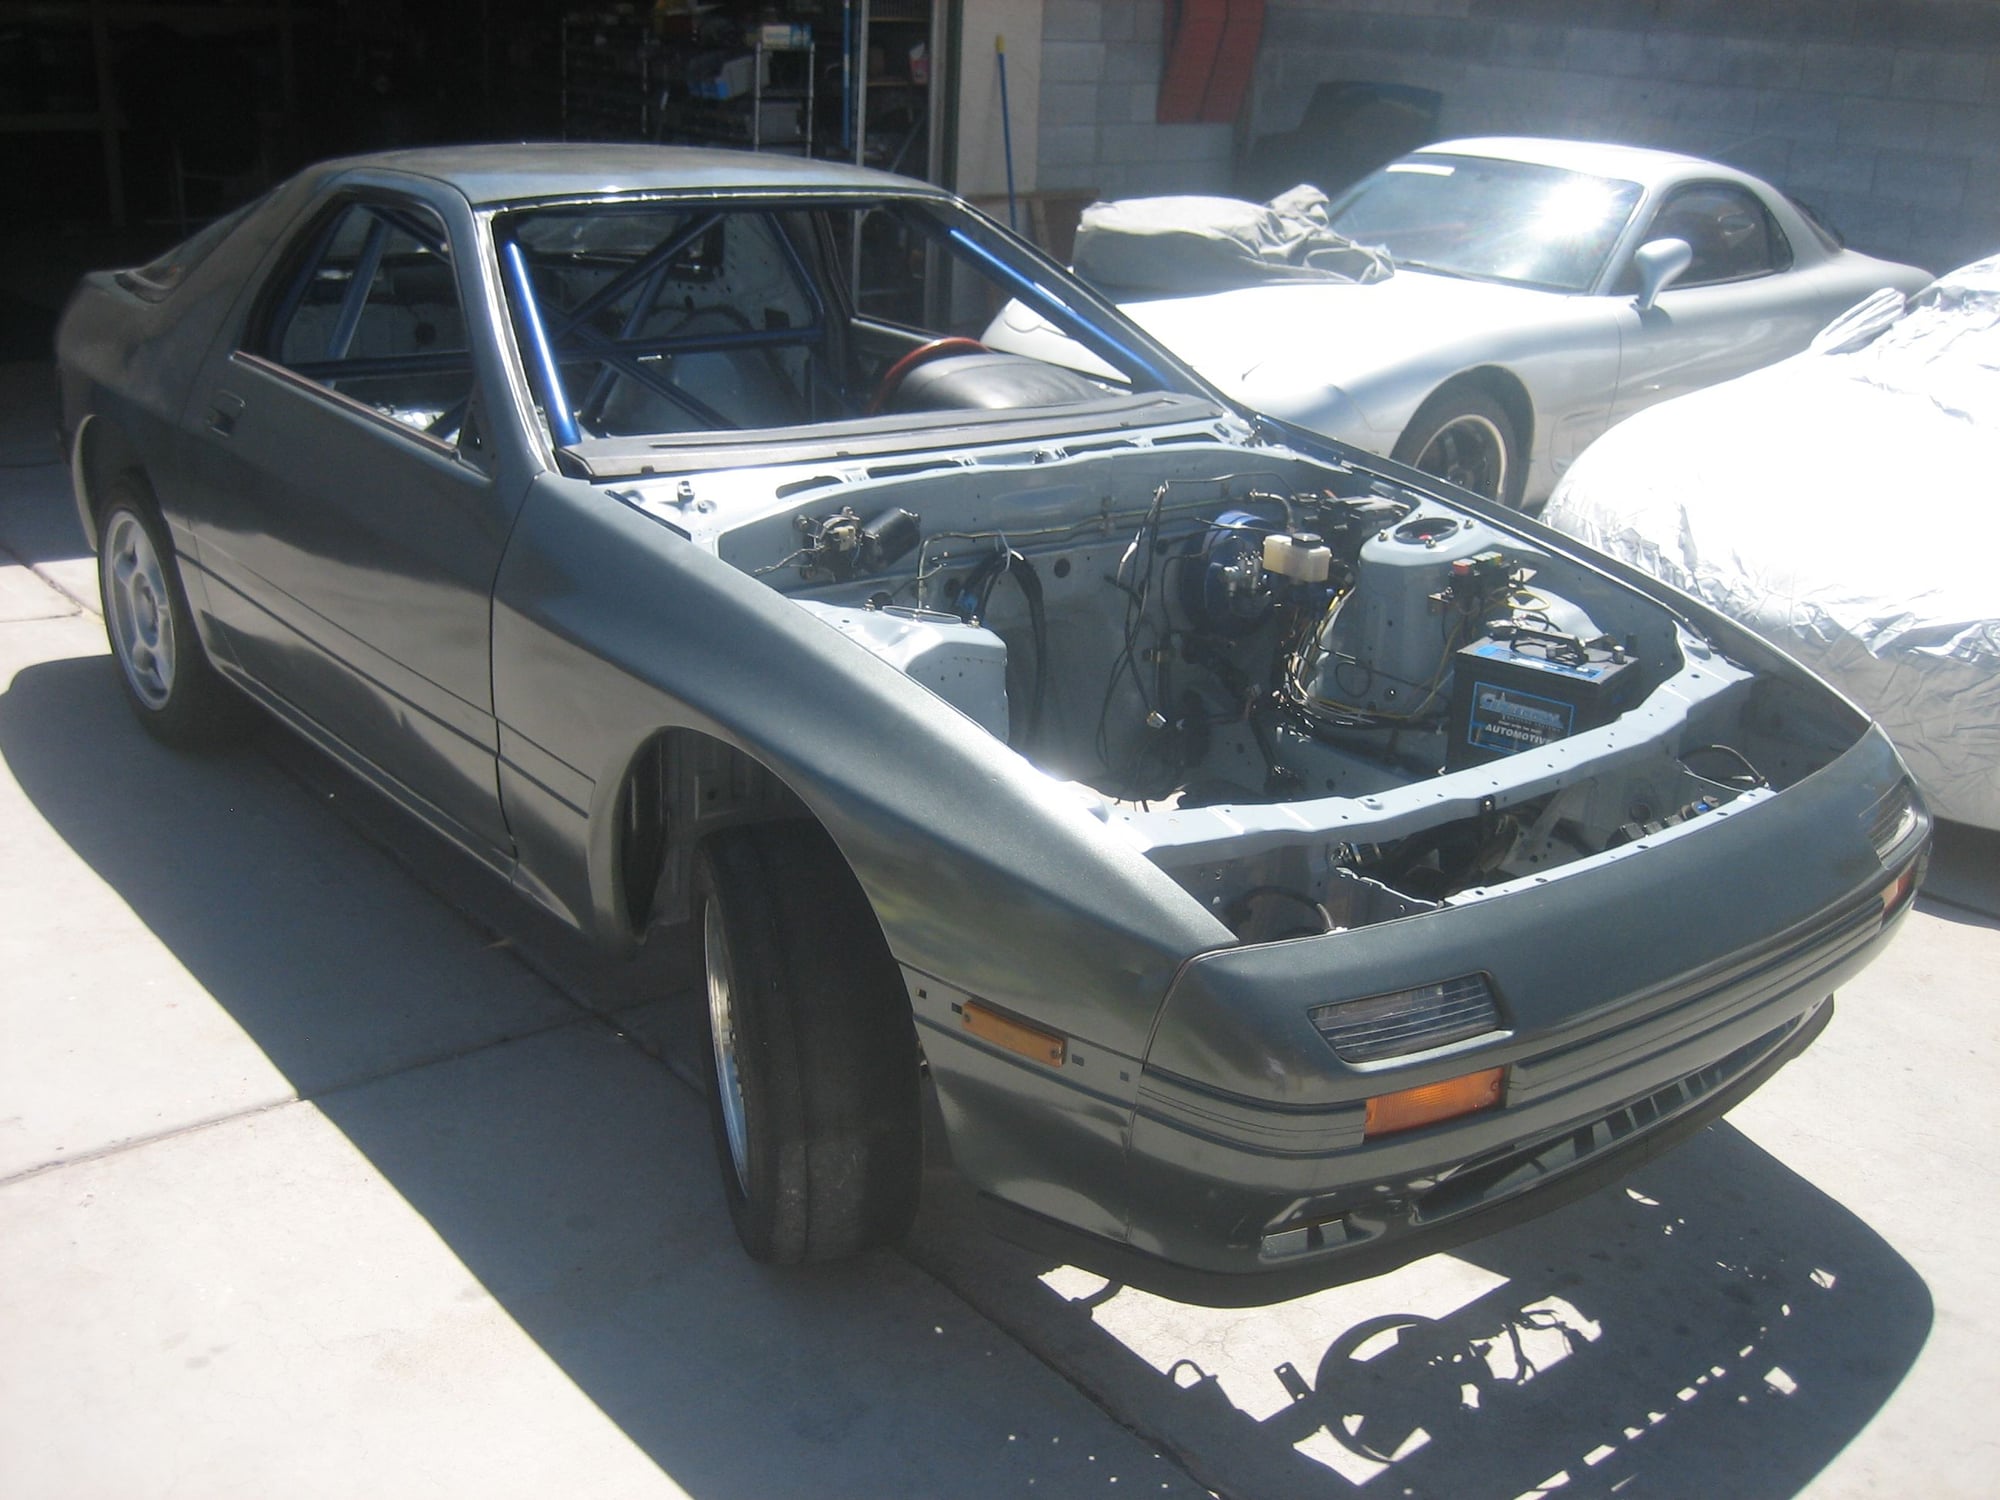 1987 Mazda RX-7 - Normaly Asperated PPort 1987 - Used - Las Vegas, NV 89108, United States